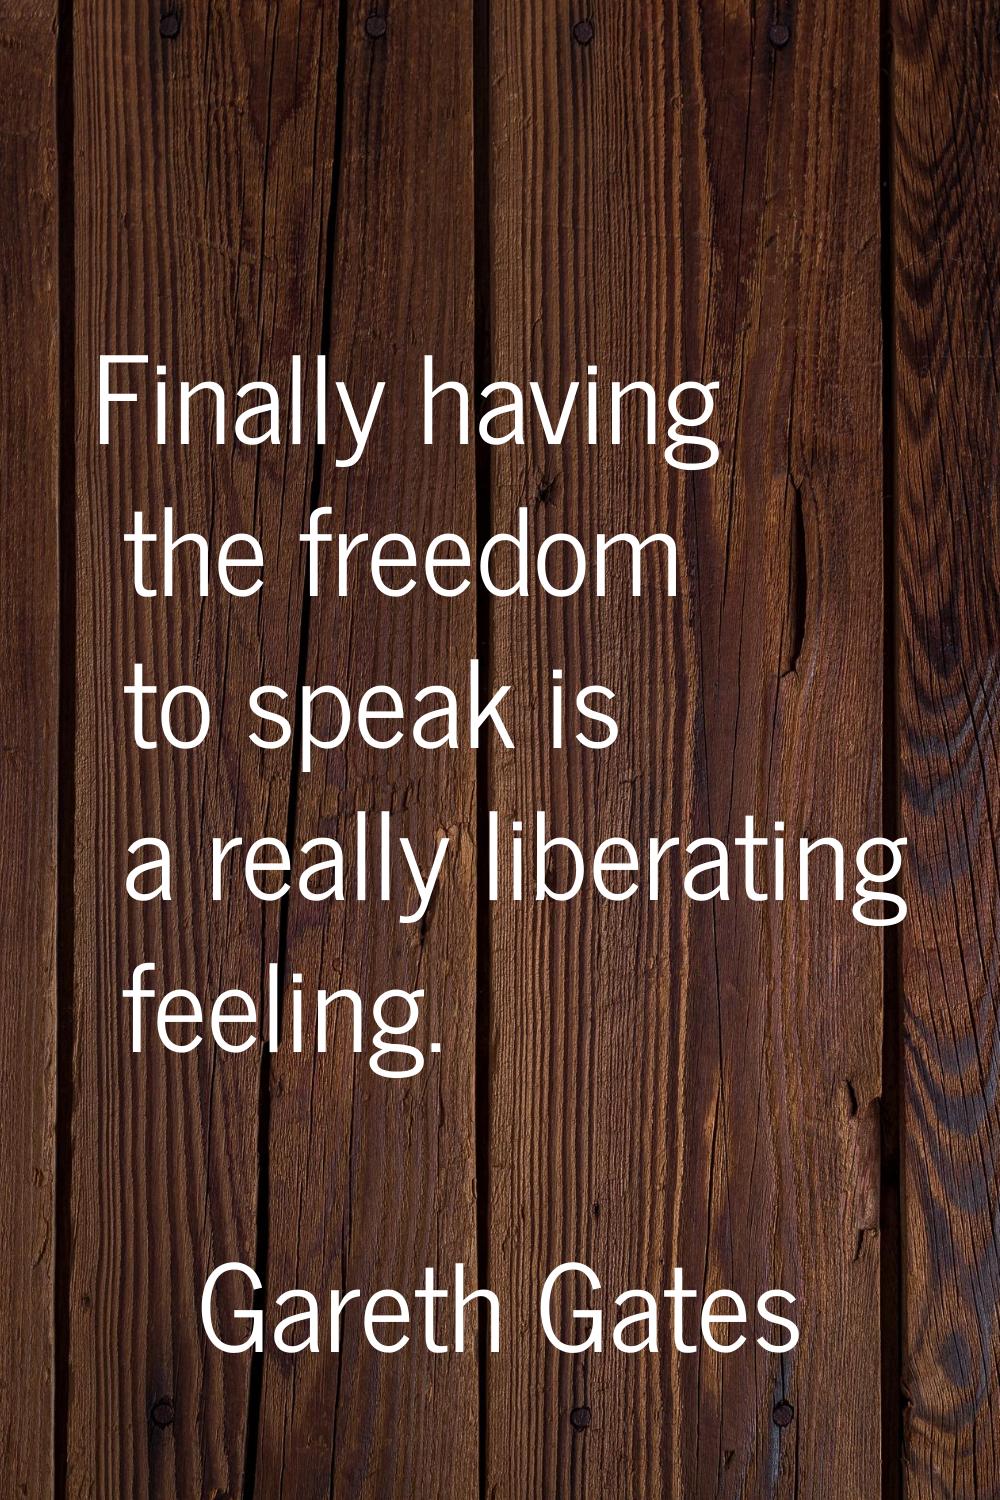 Finally having the freedom to speak is a really liberating feeling.